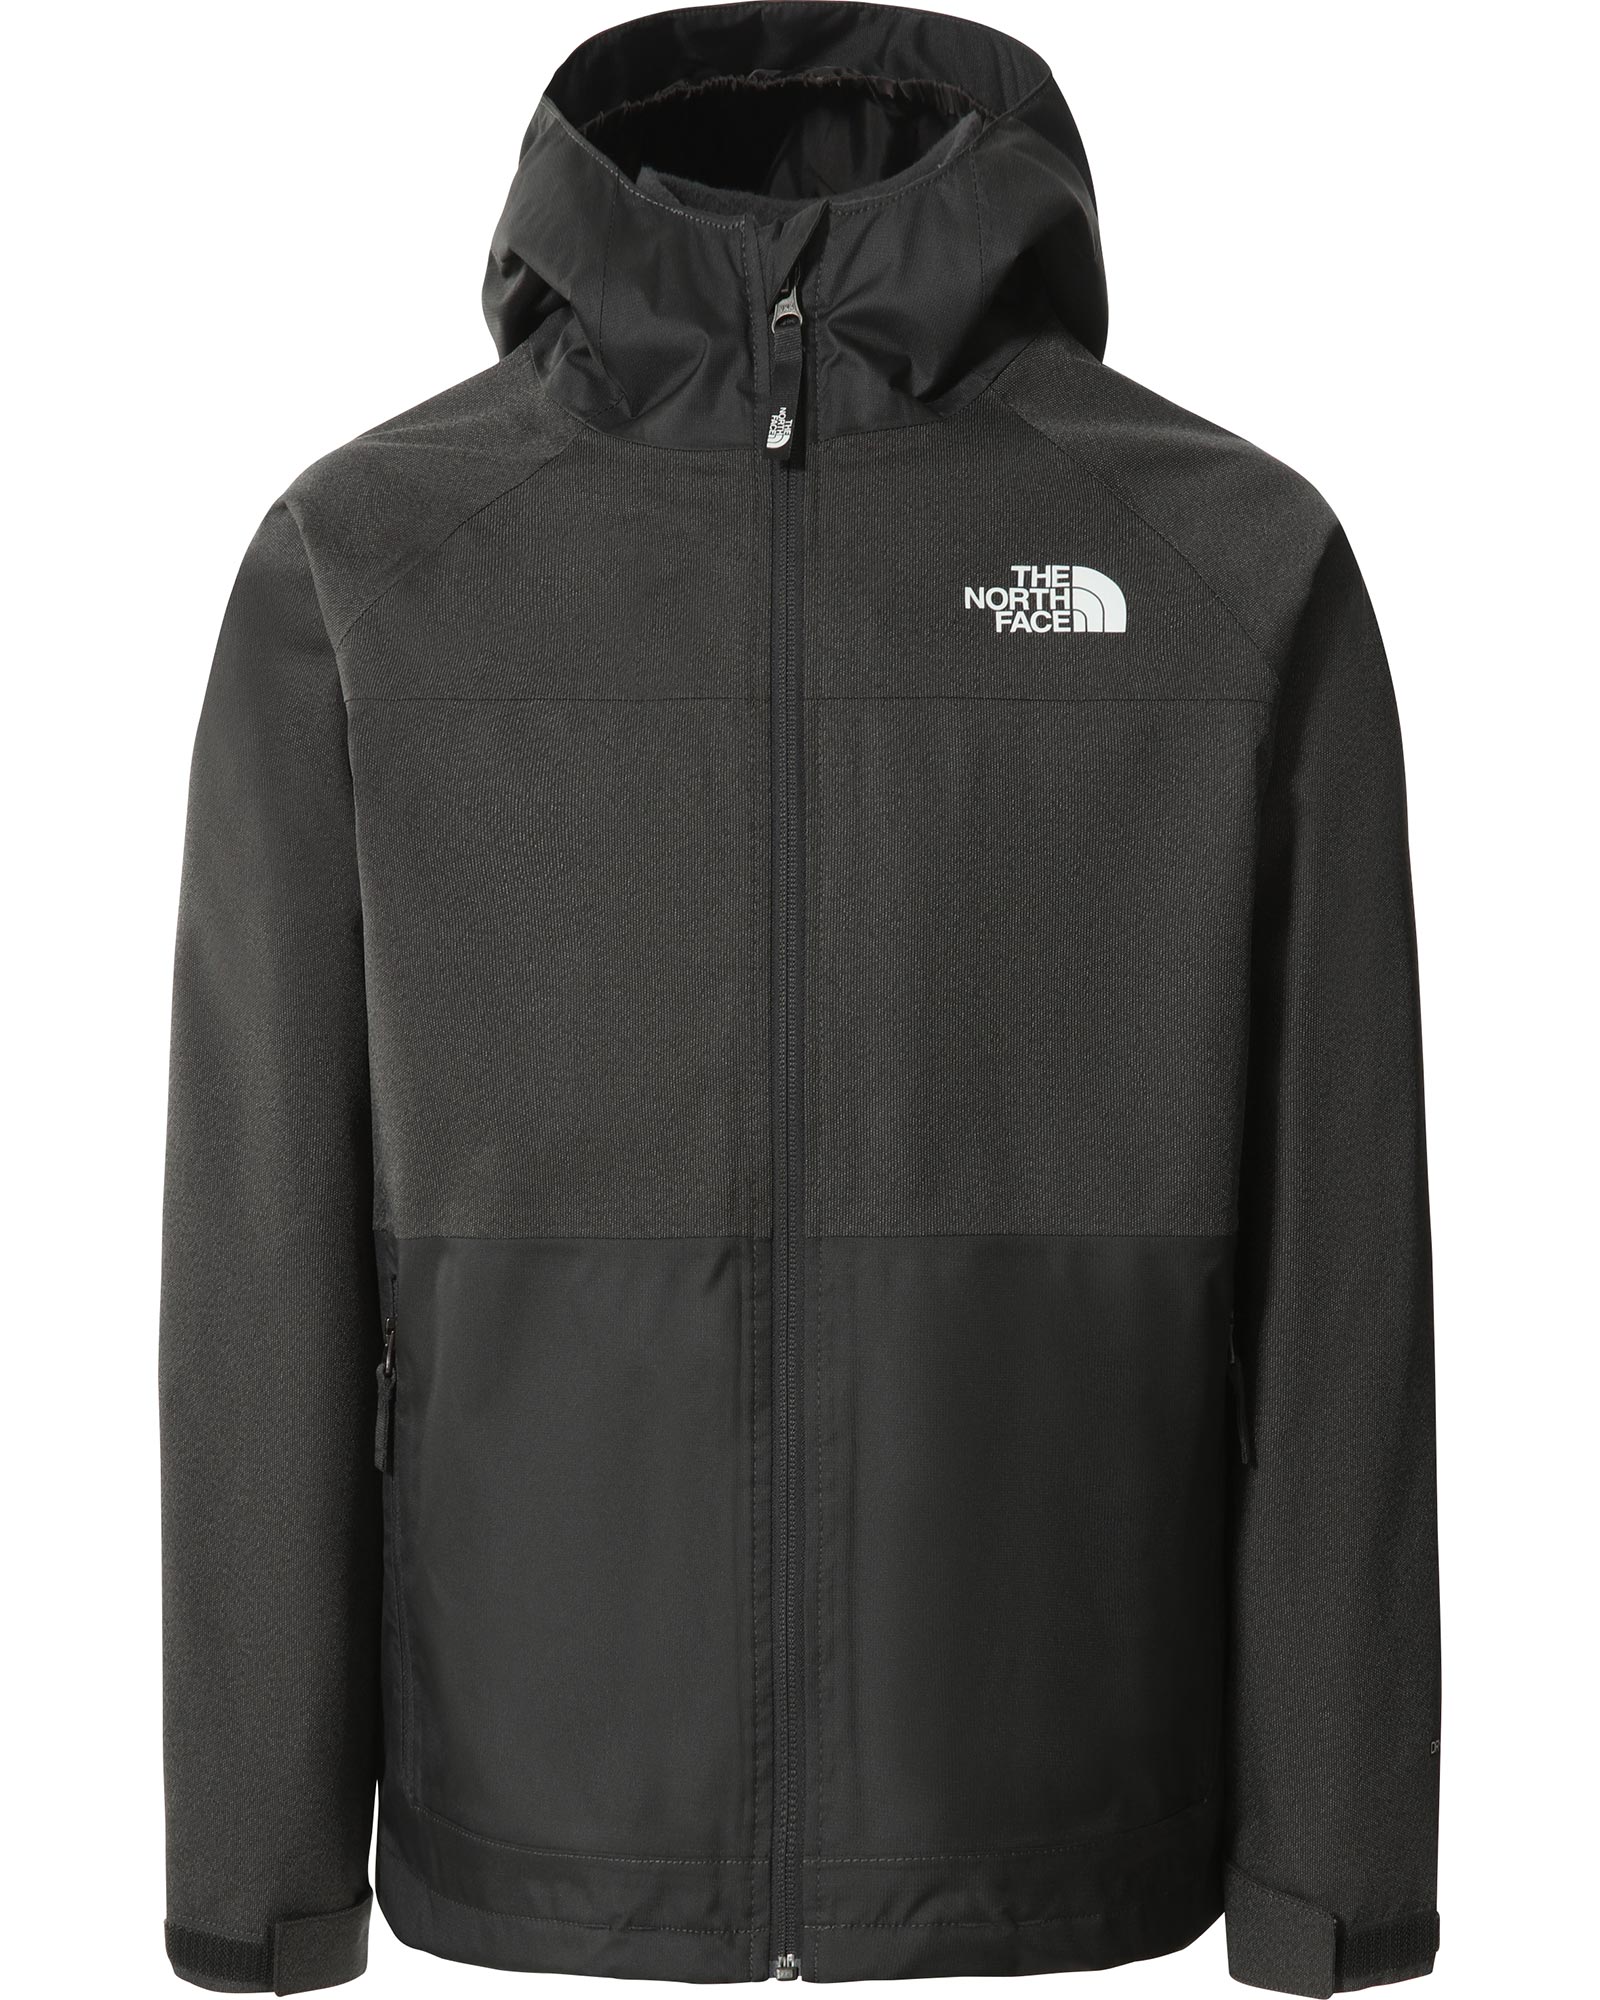 The North Face Vortex Triclimate Boys Jacket